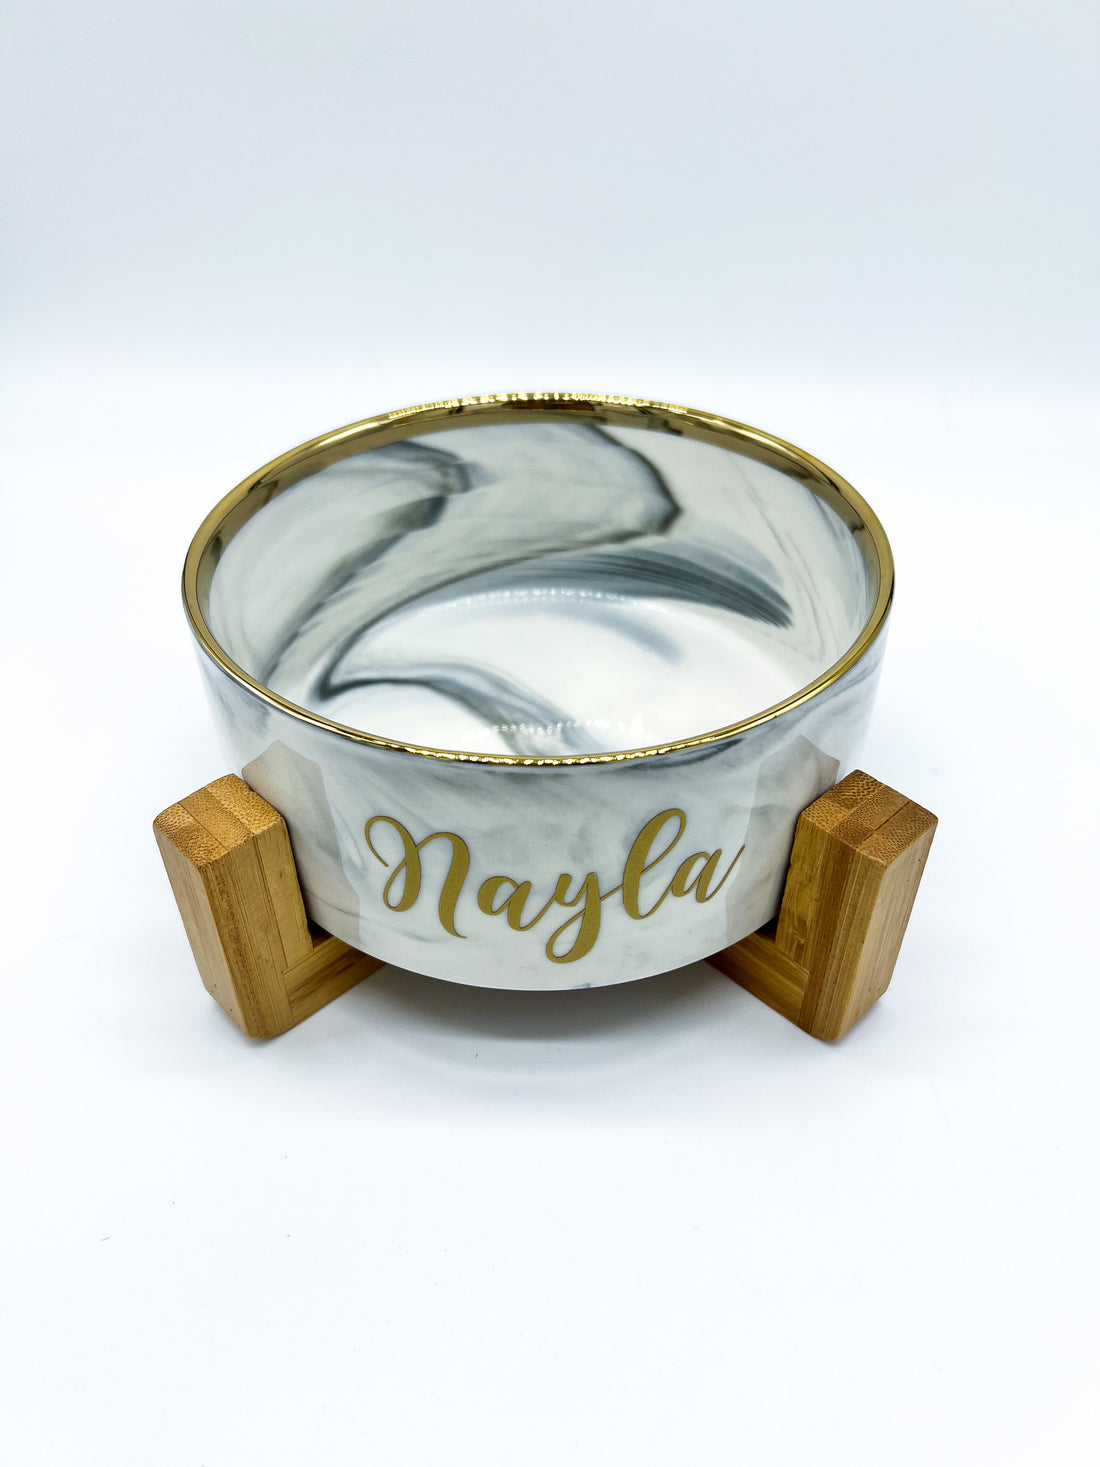 Marble dog bowl with gold rim